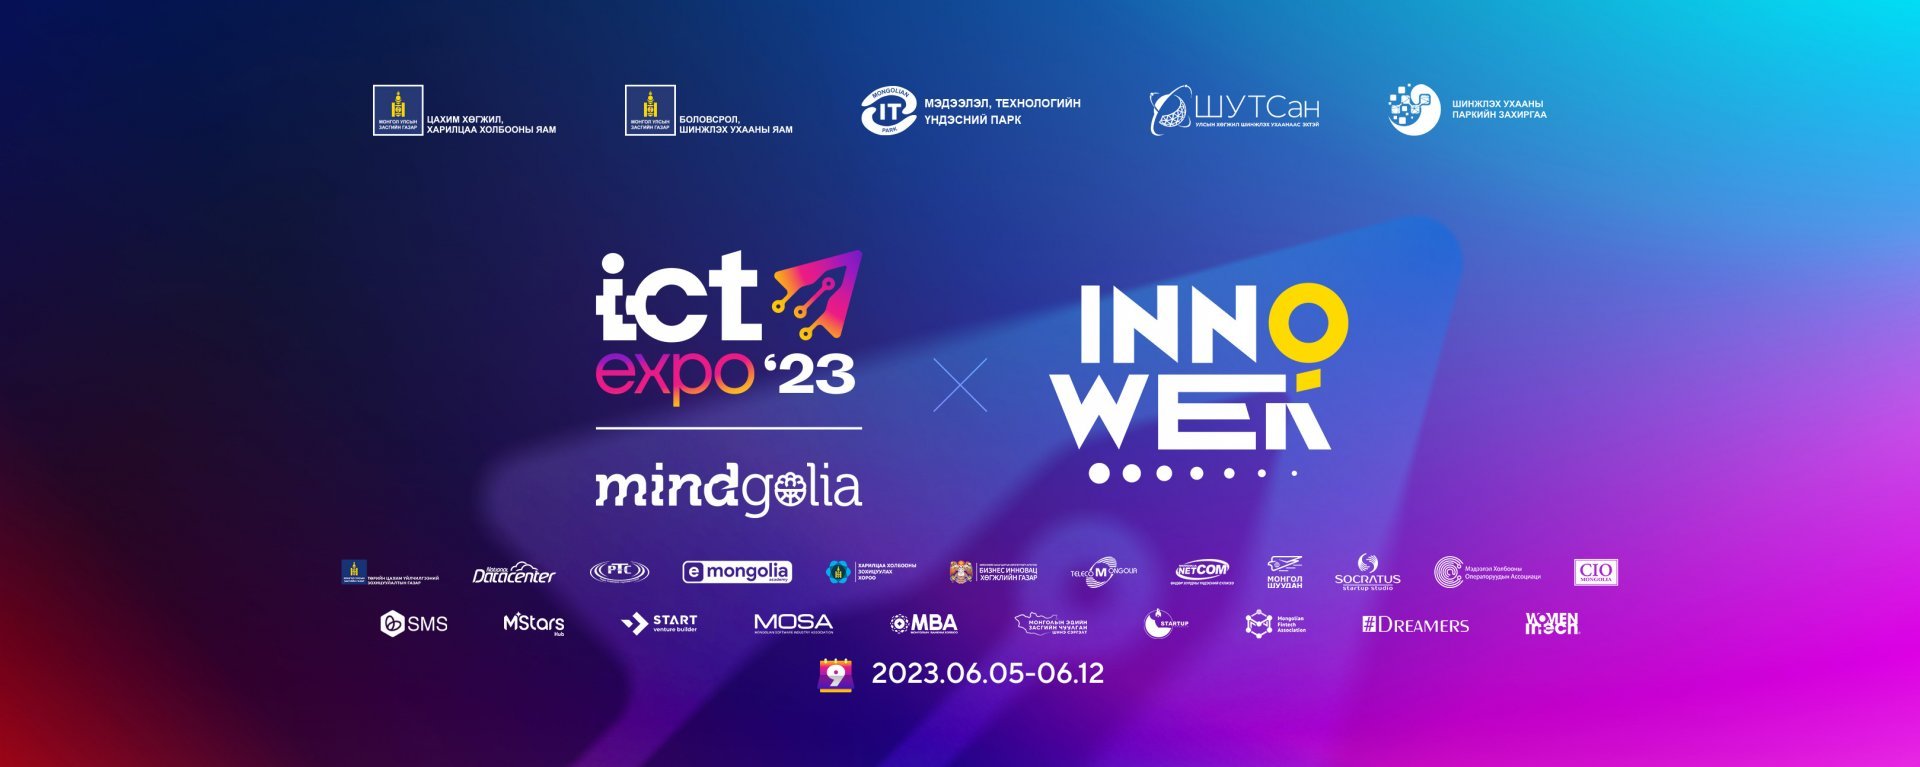 ICT Expo 2023: Telecommunication and Information Technology Event